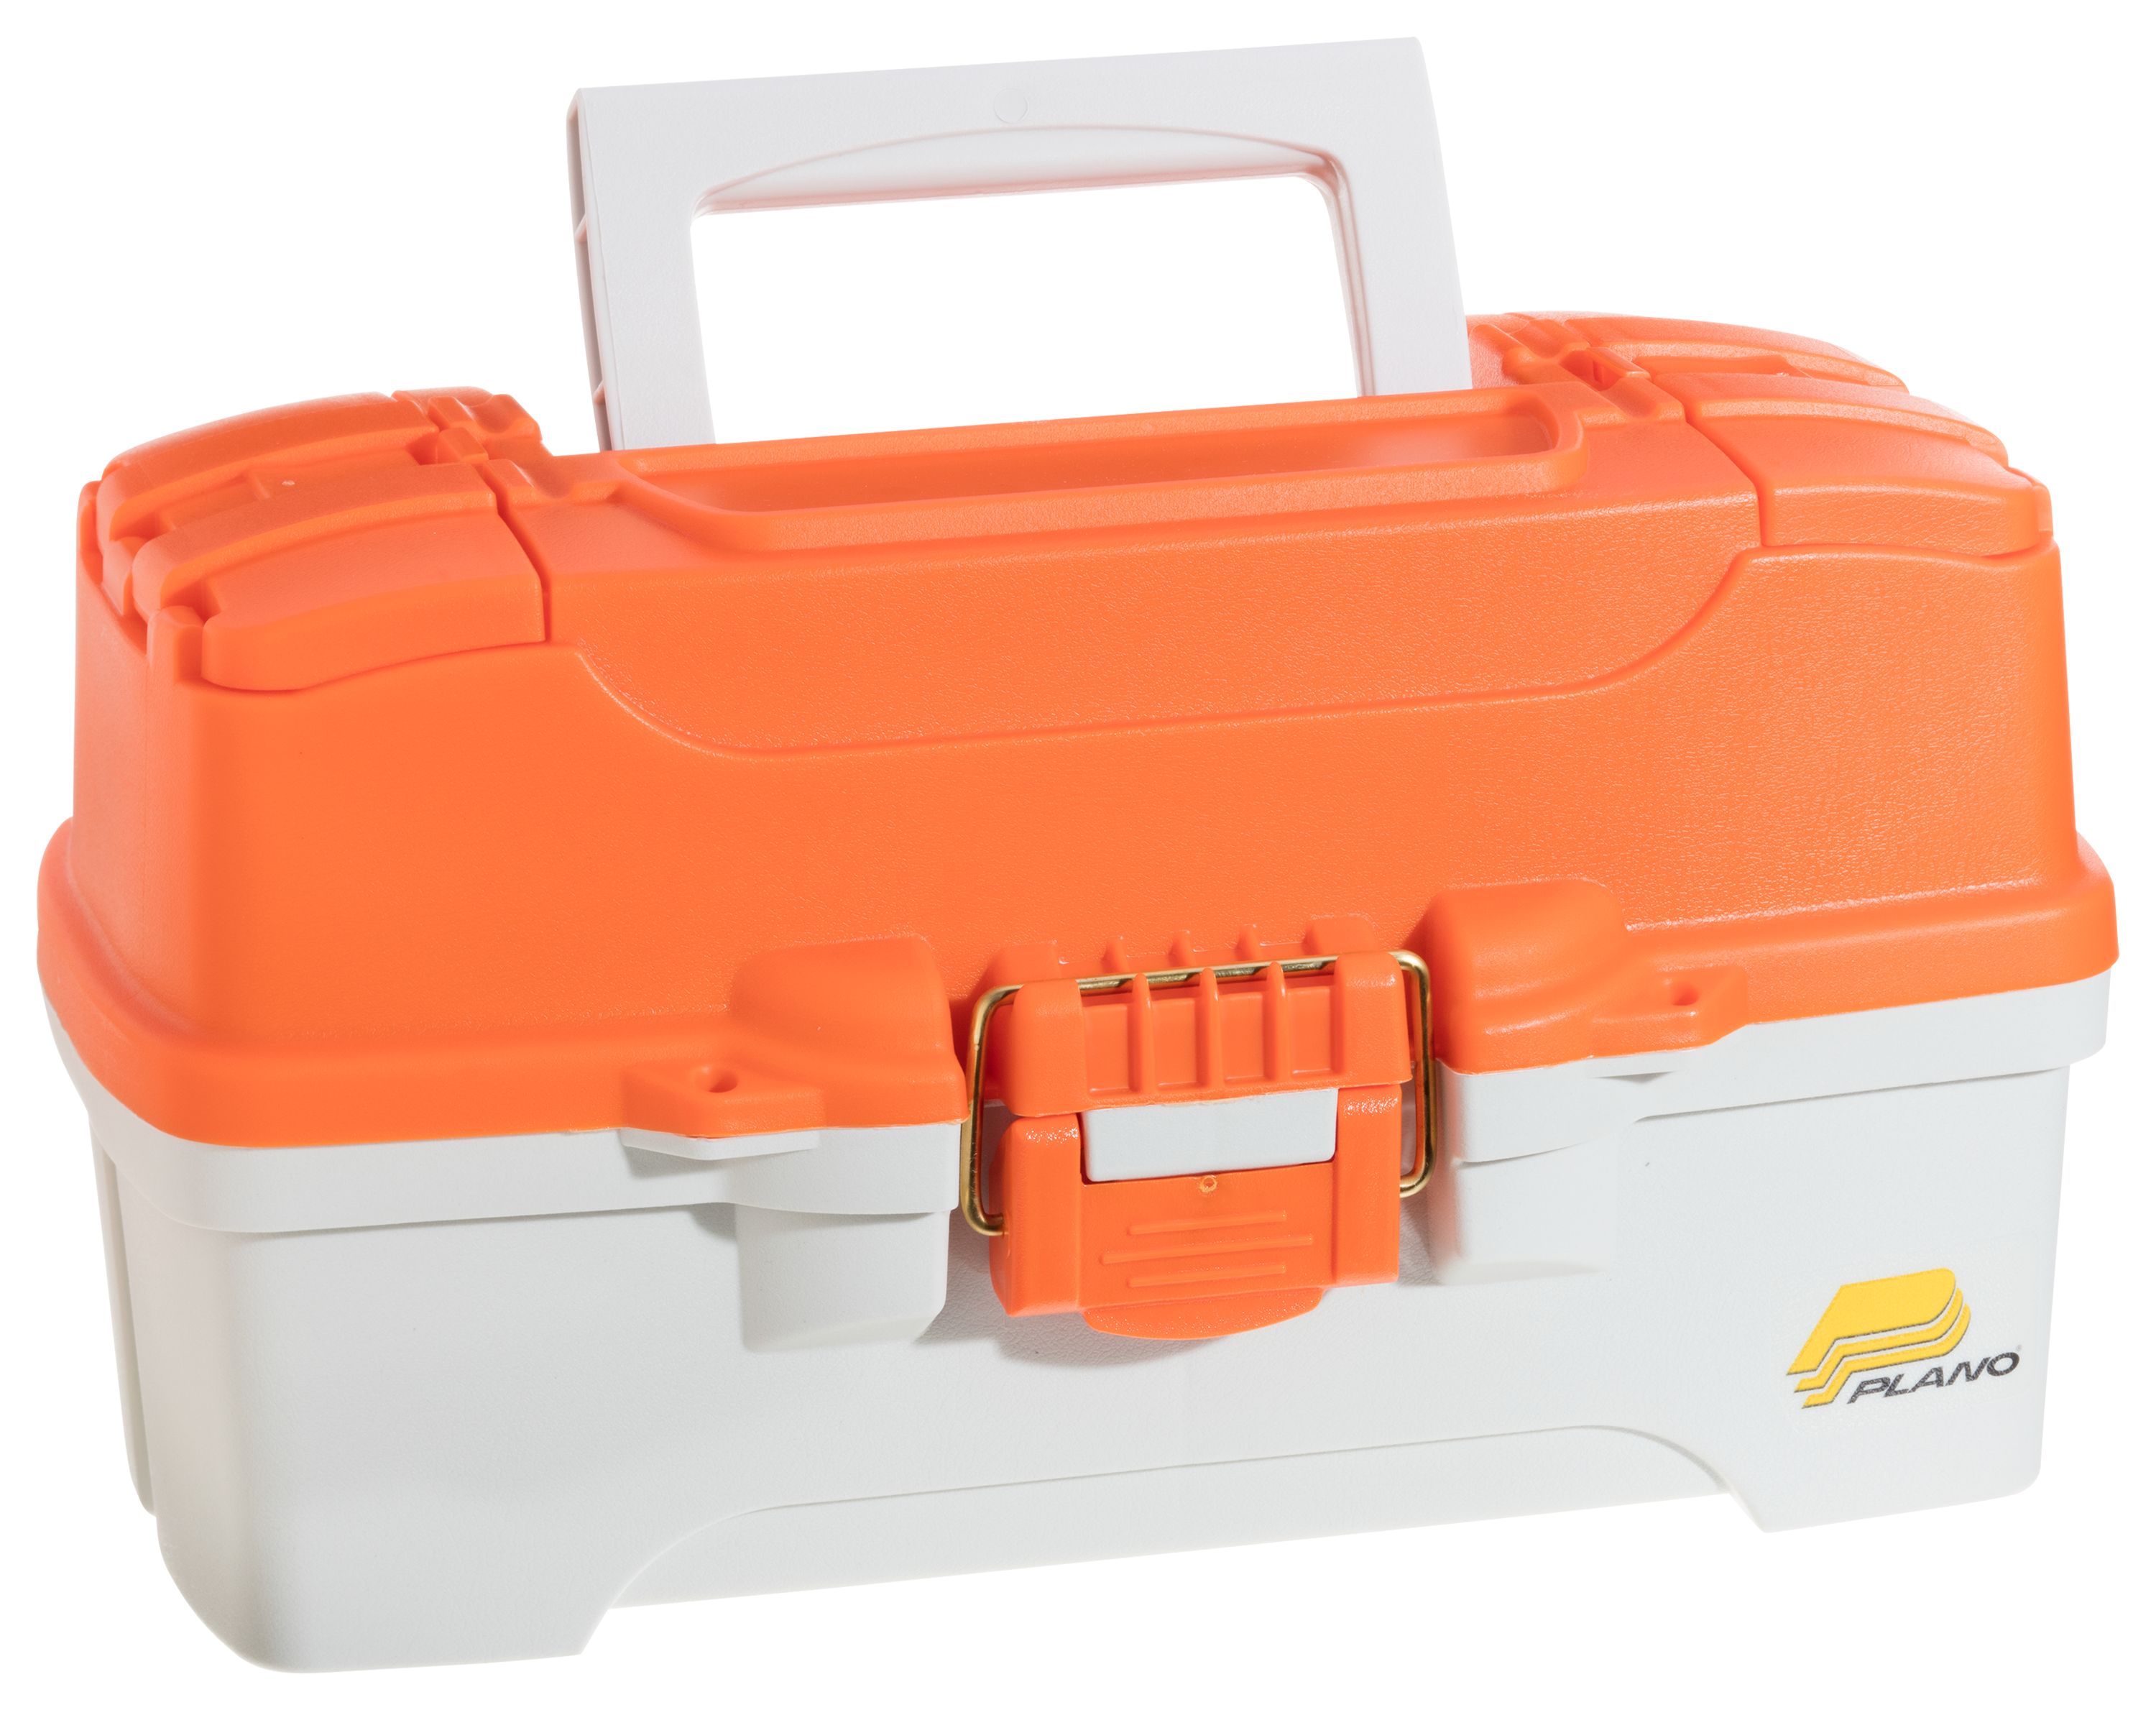 Fishing Tackle Box - 4 Tray with Top Lid Storage